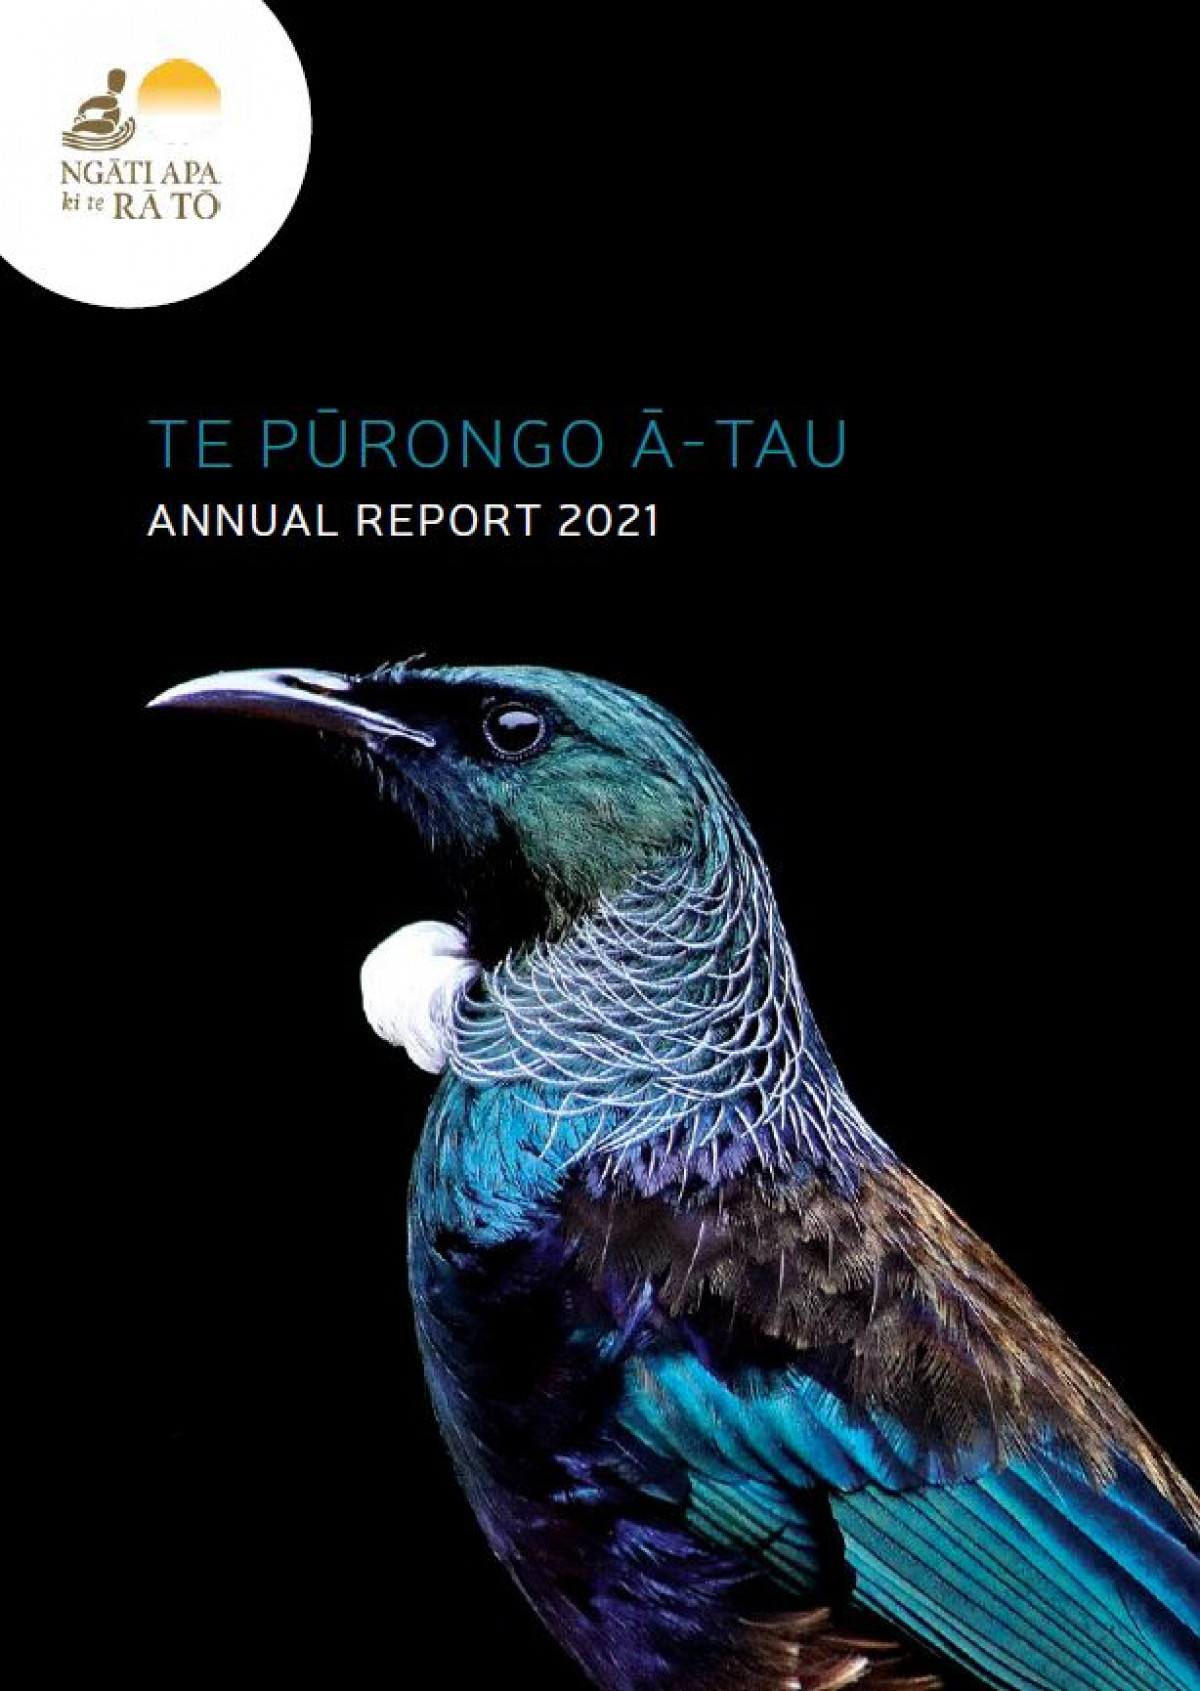 Annual Report 2021 out now